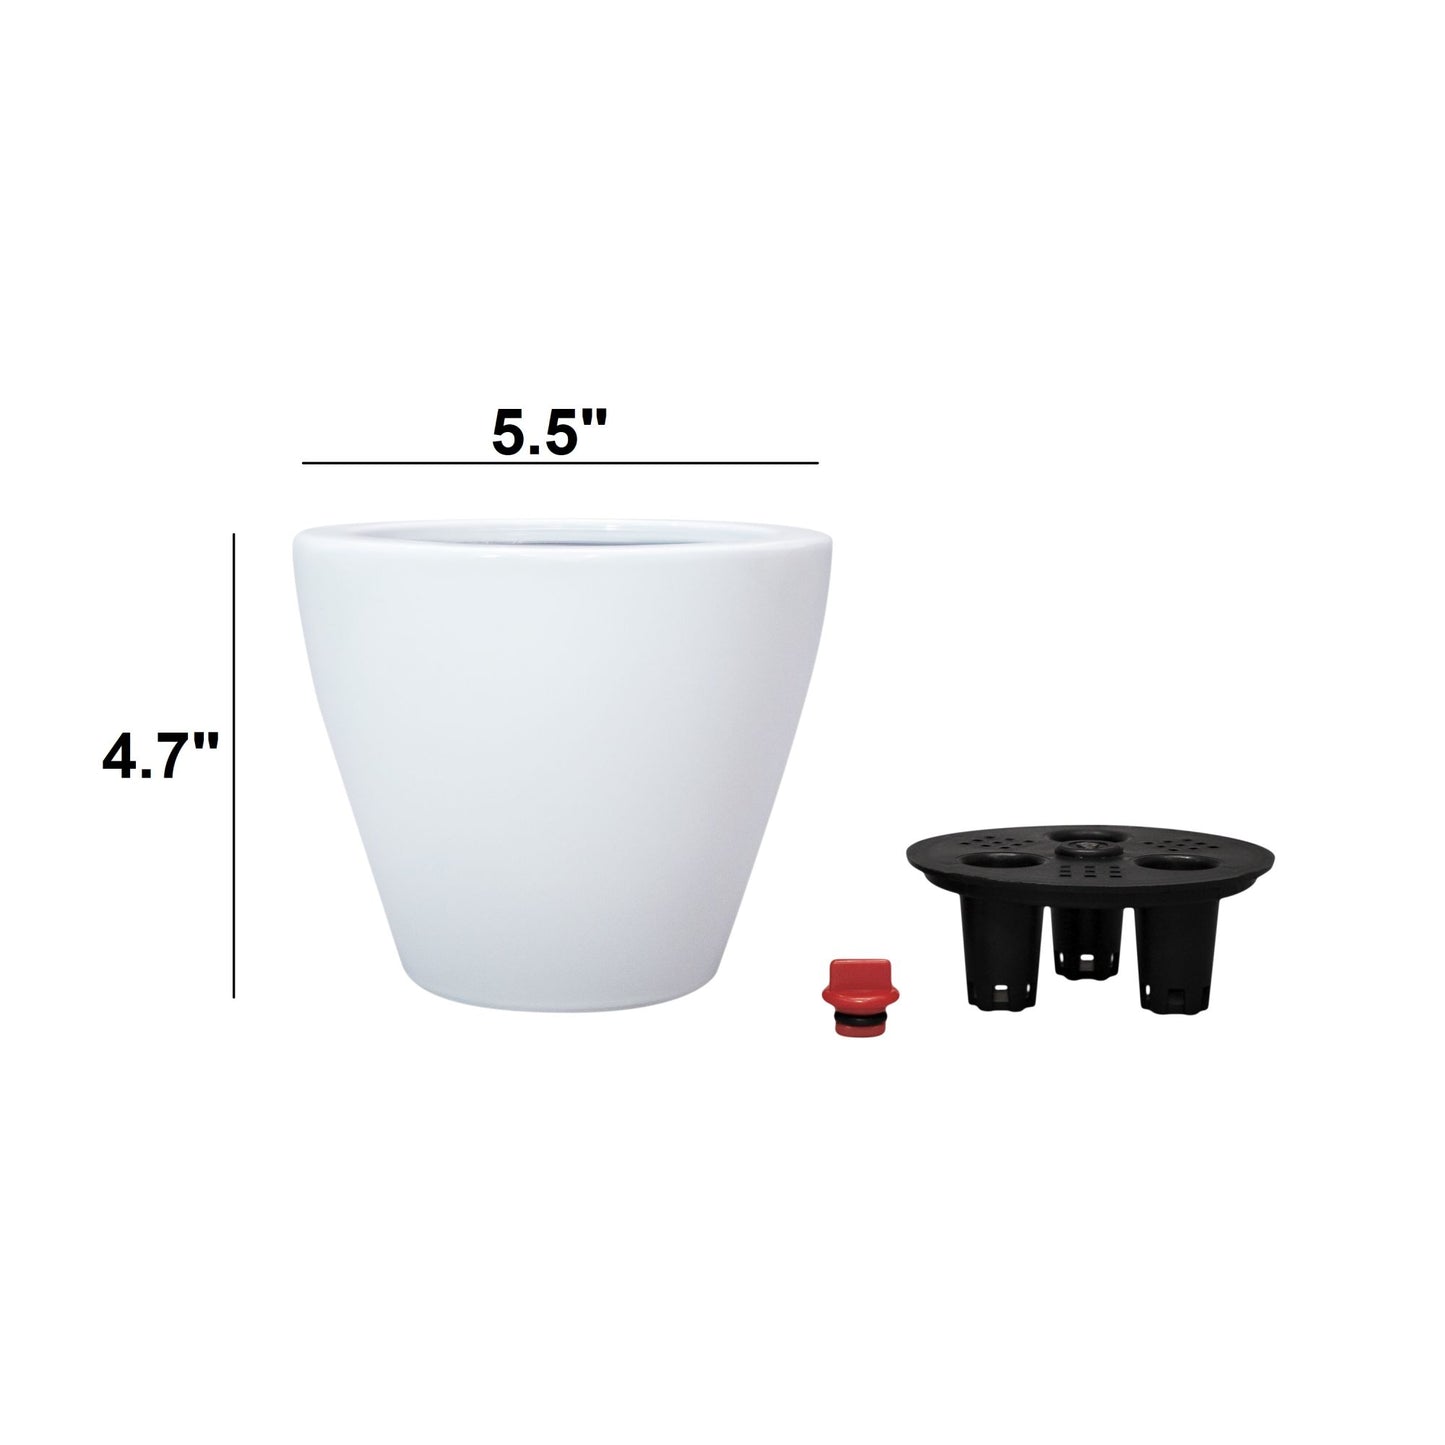 2-Pack Smart Self-watering Planter Pot for Indoor and Outdoor - White - Round Cone